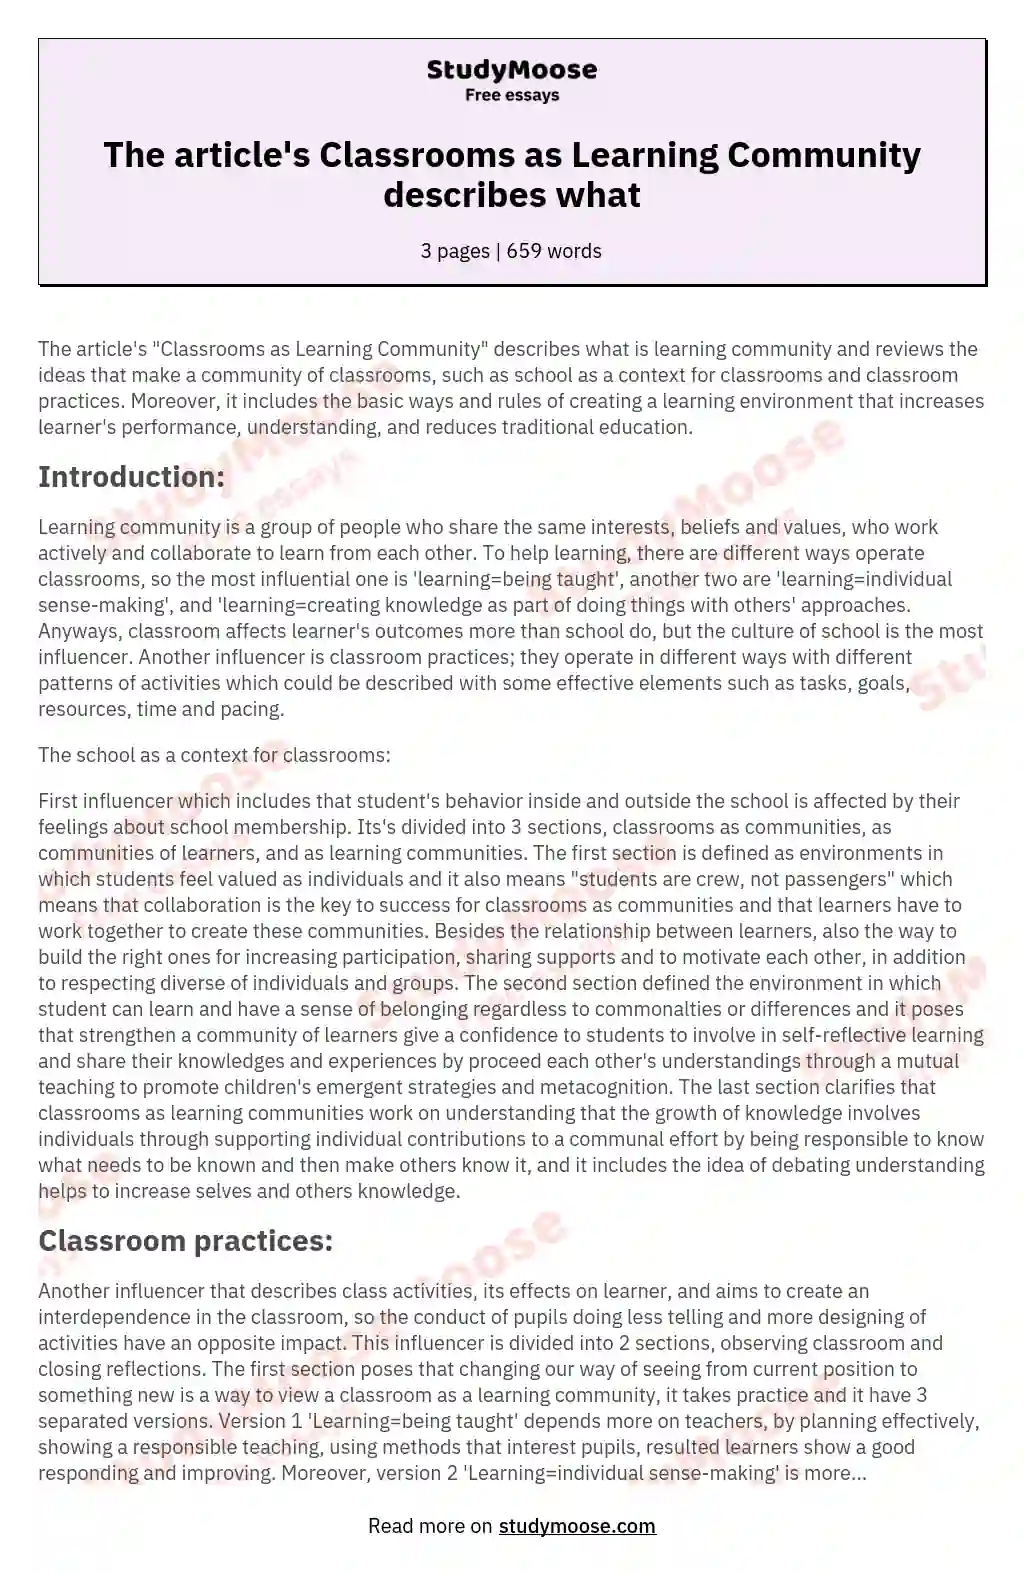 The article's Classrooms as Learning Community describes what essay